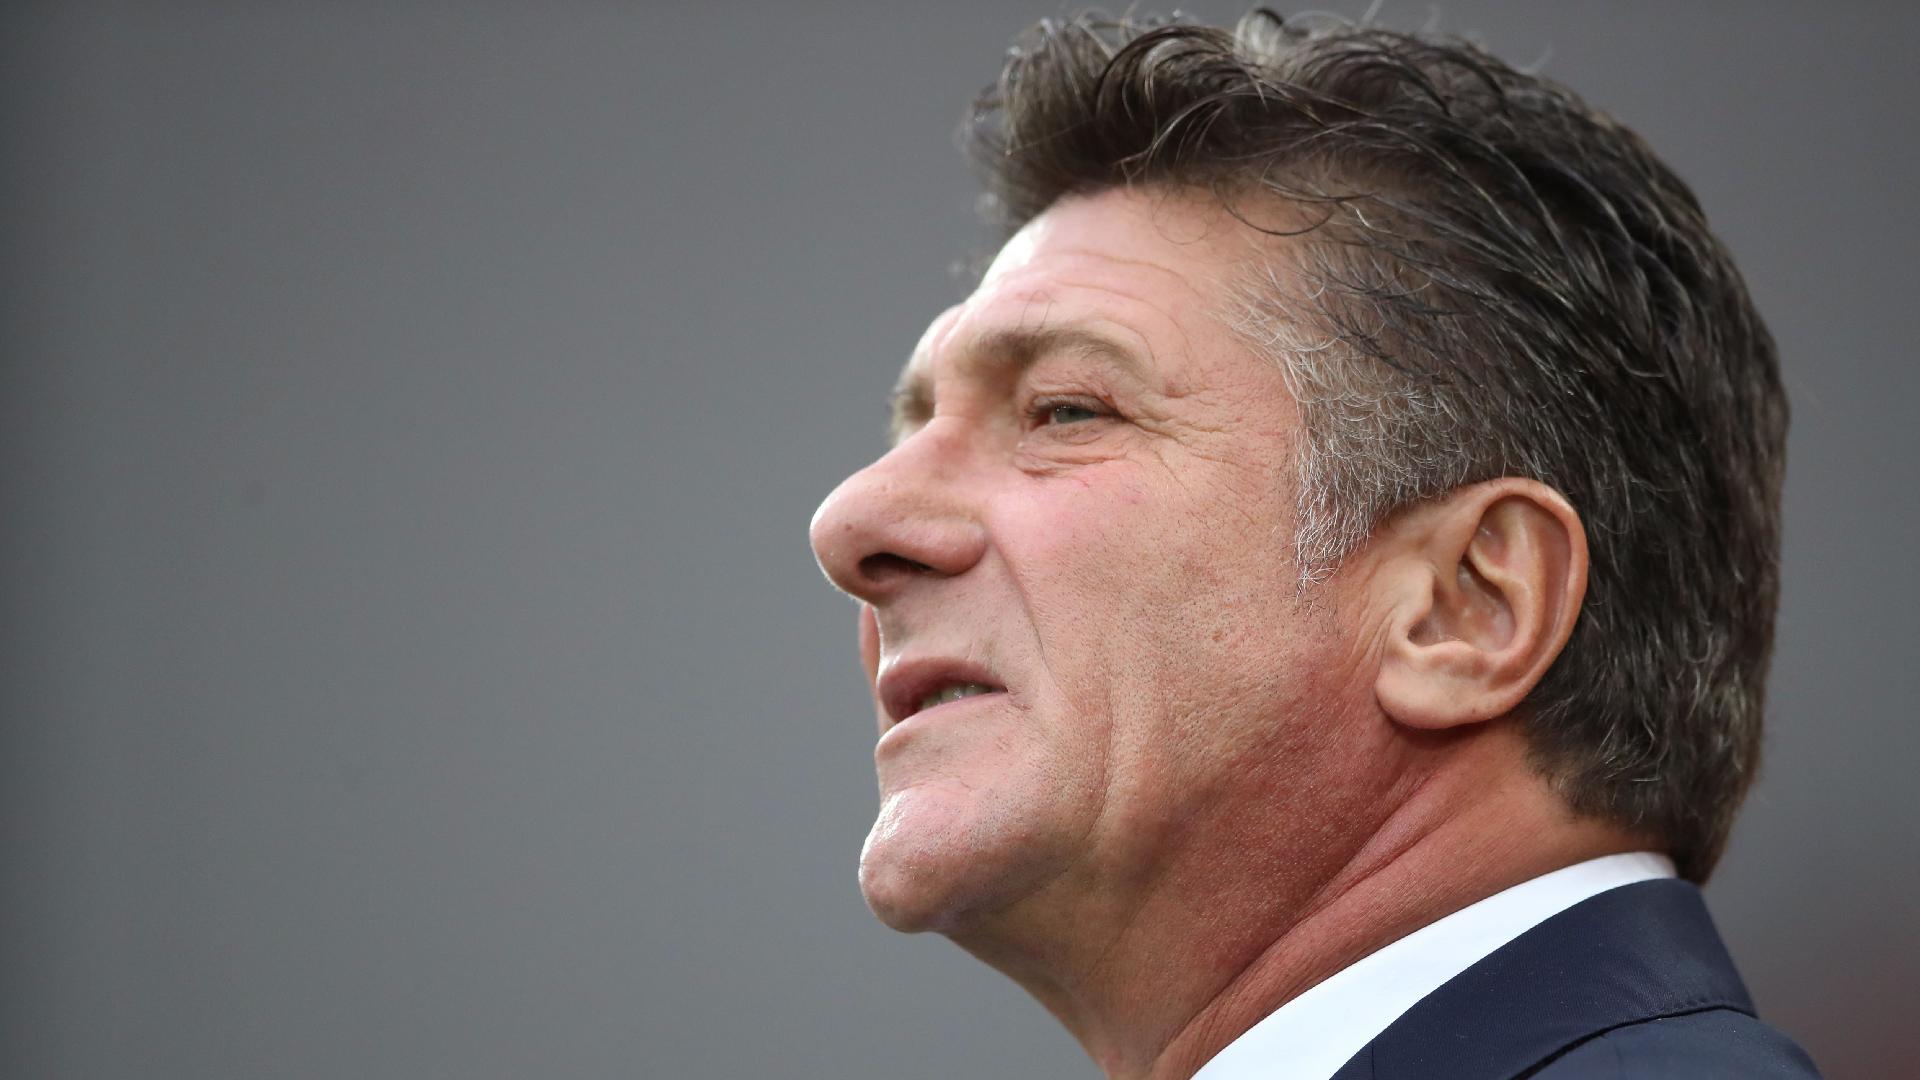 Walter Mazzarri wants Napoli ‘back to our brilliant selves’ in top-four chase